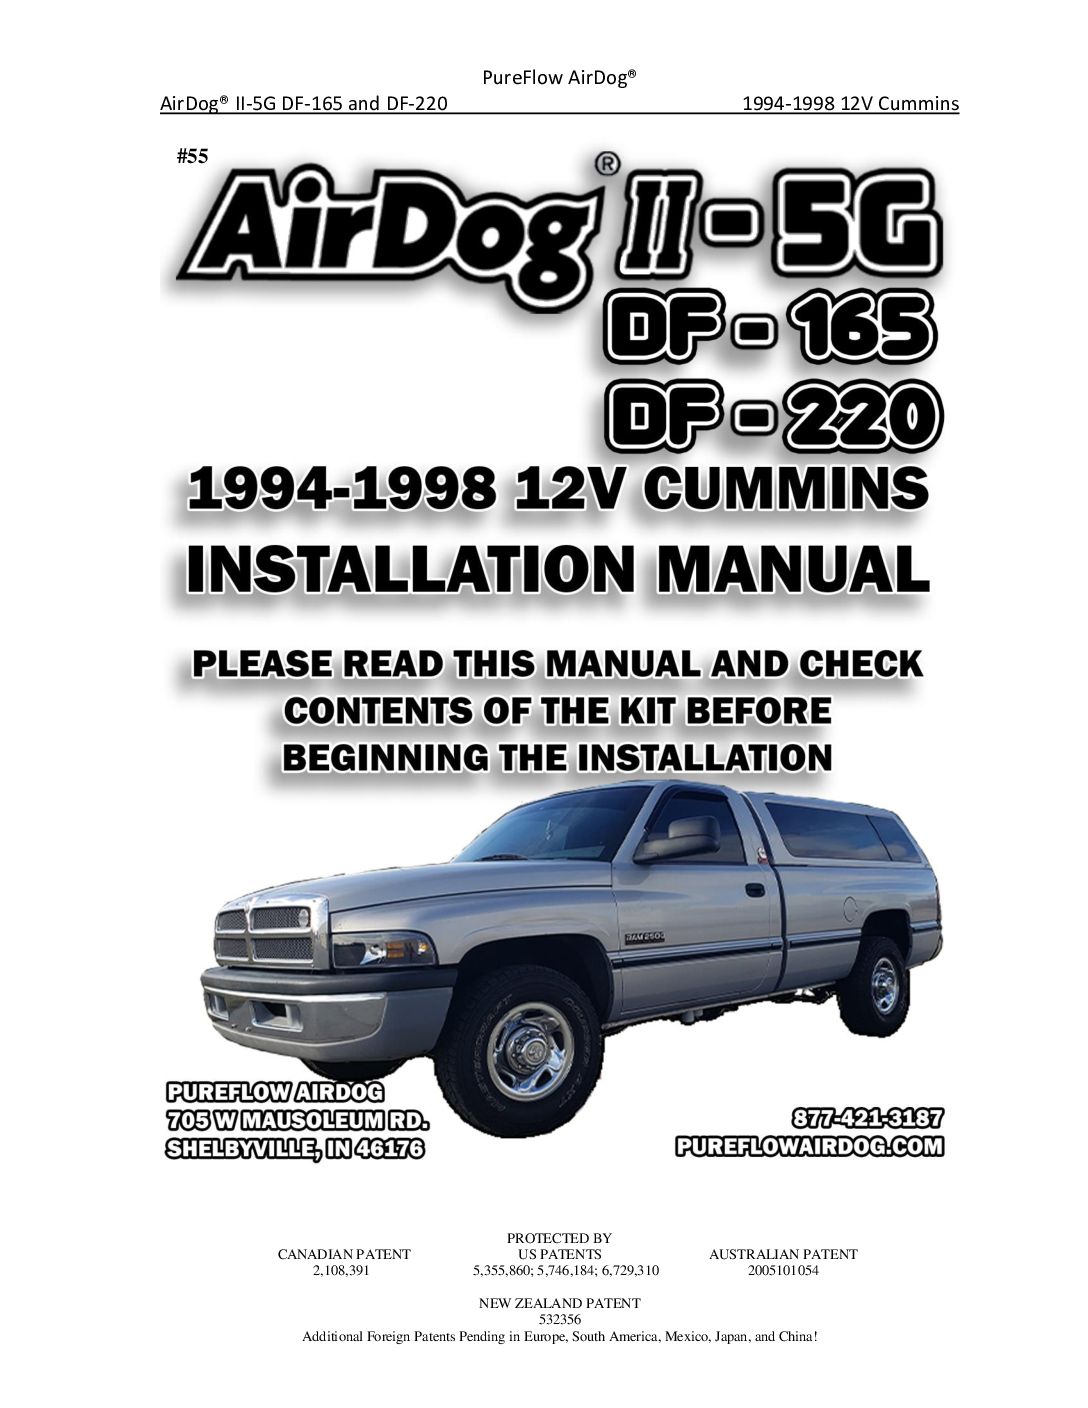 AirDog®II-5G fuel 
air separation and delivery system for the 1994-1998 Cummins 12V